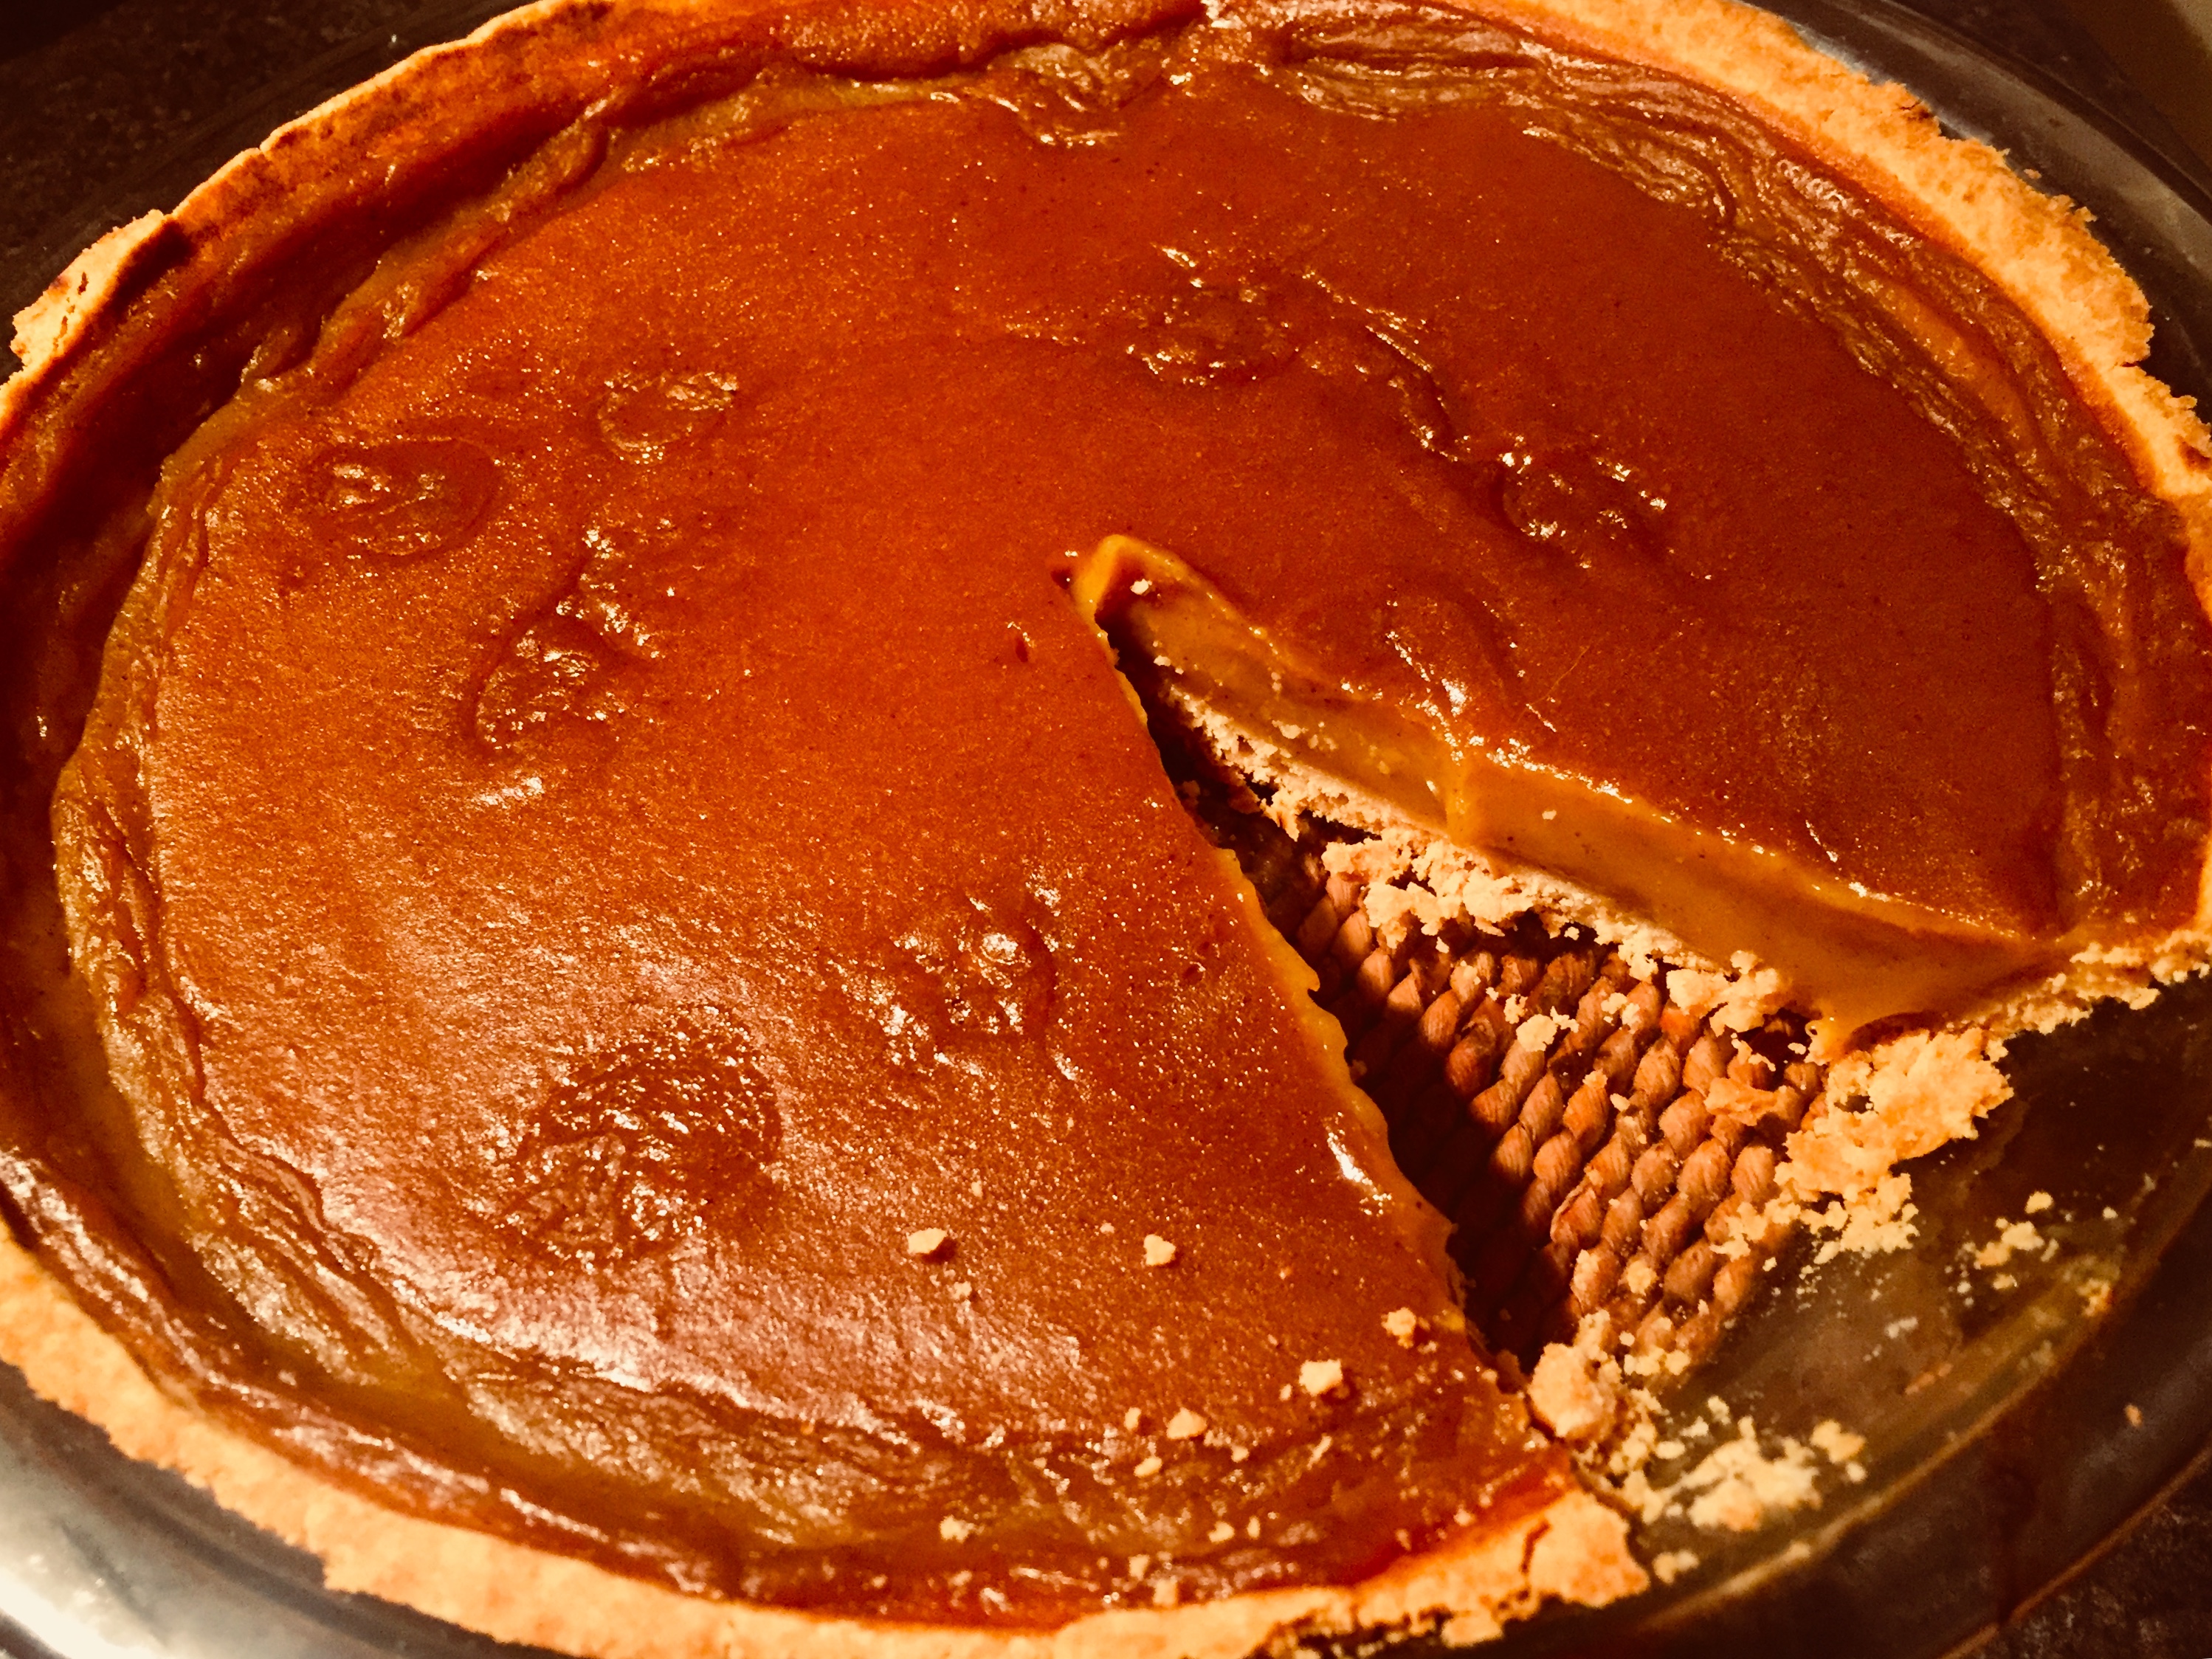 Delicious homemade pumpkin pie made from scratch with roasted pumpkin and a delicious gluten free pie shell